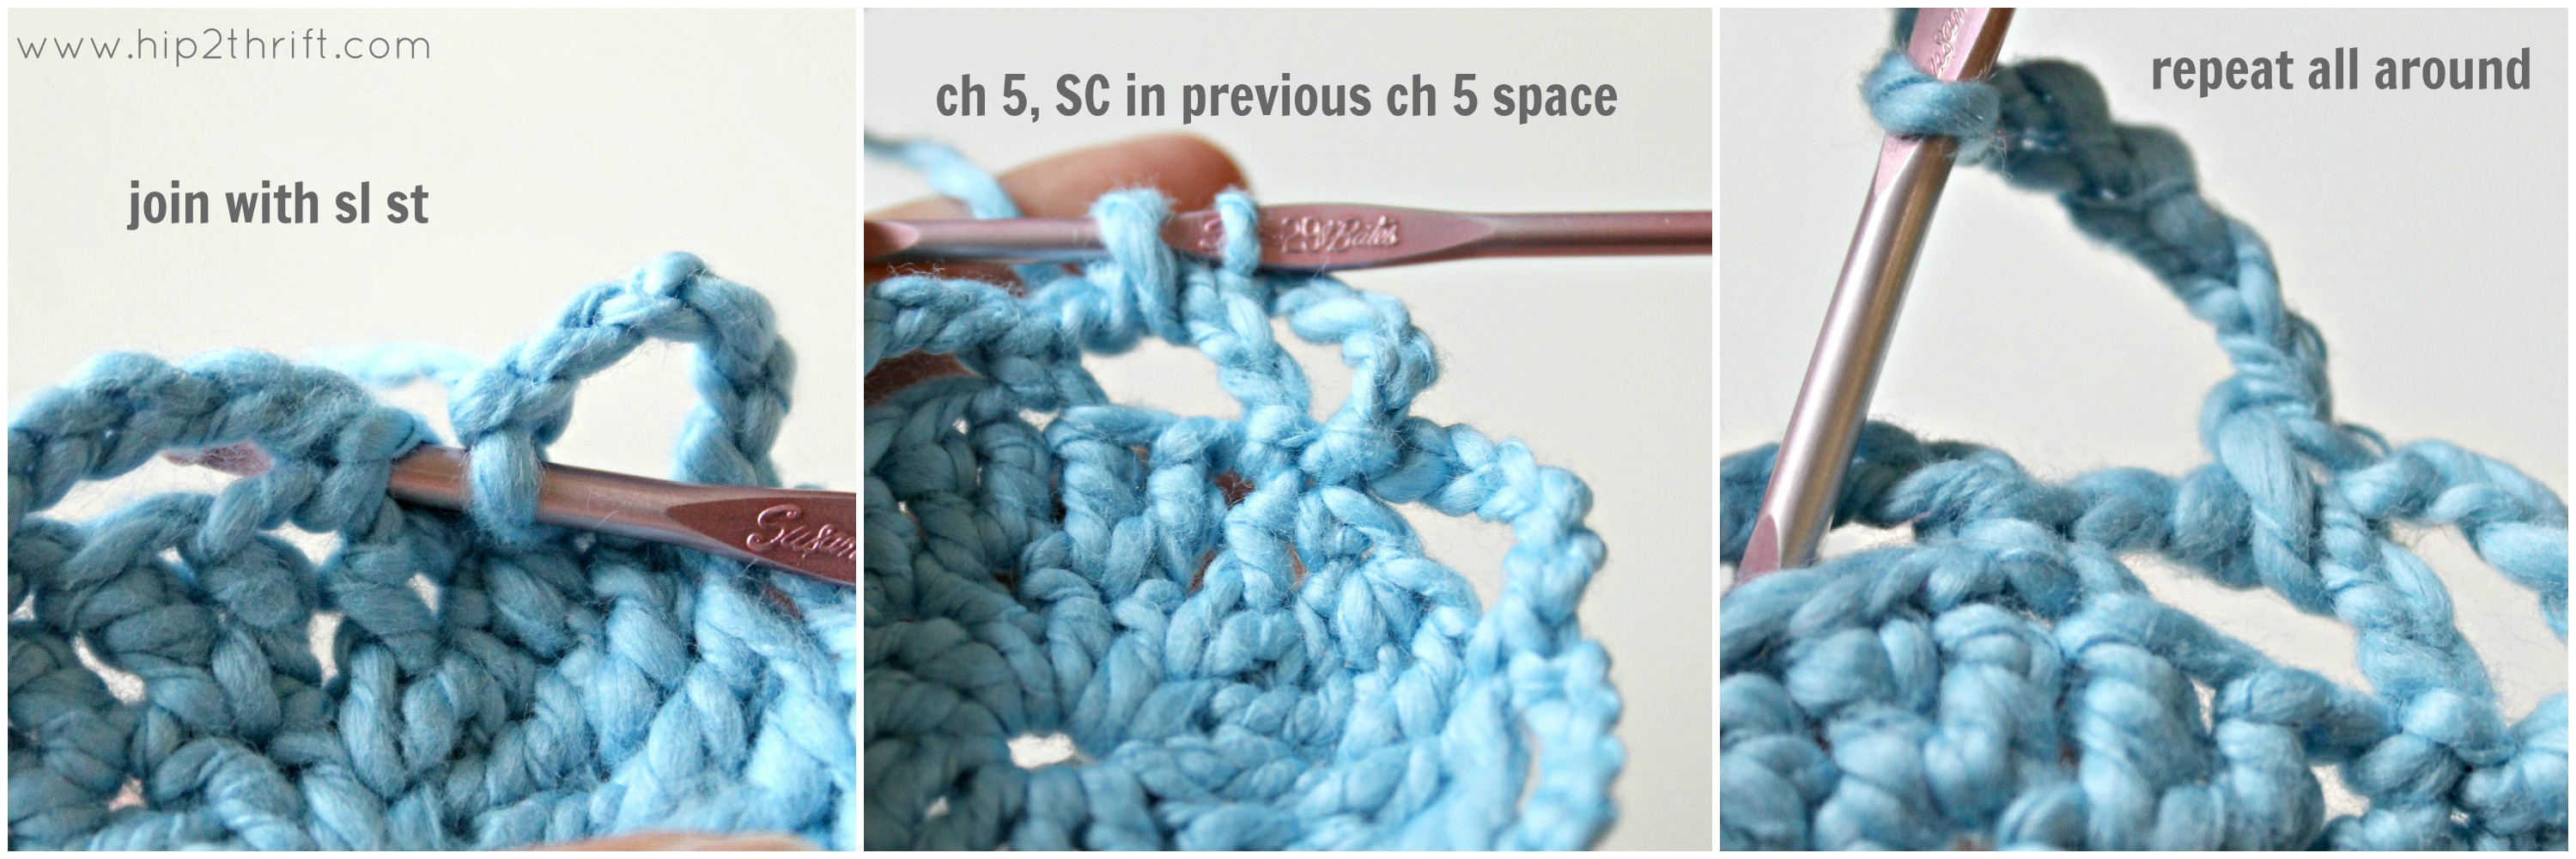 How To Crochet A Bag Step By Step